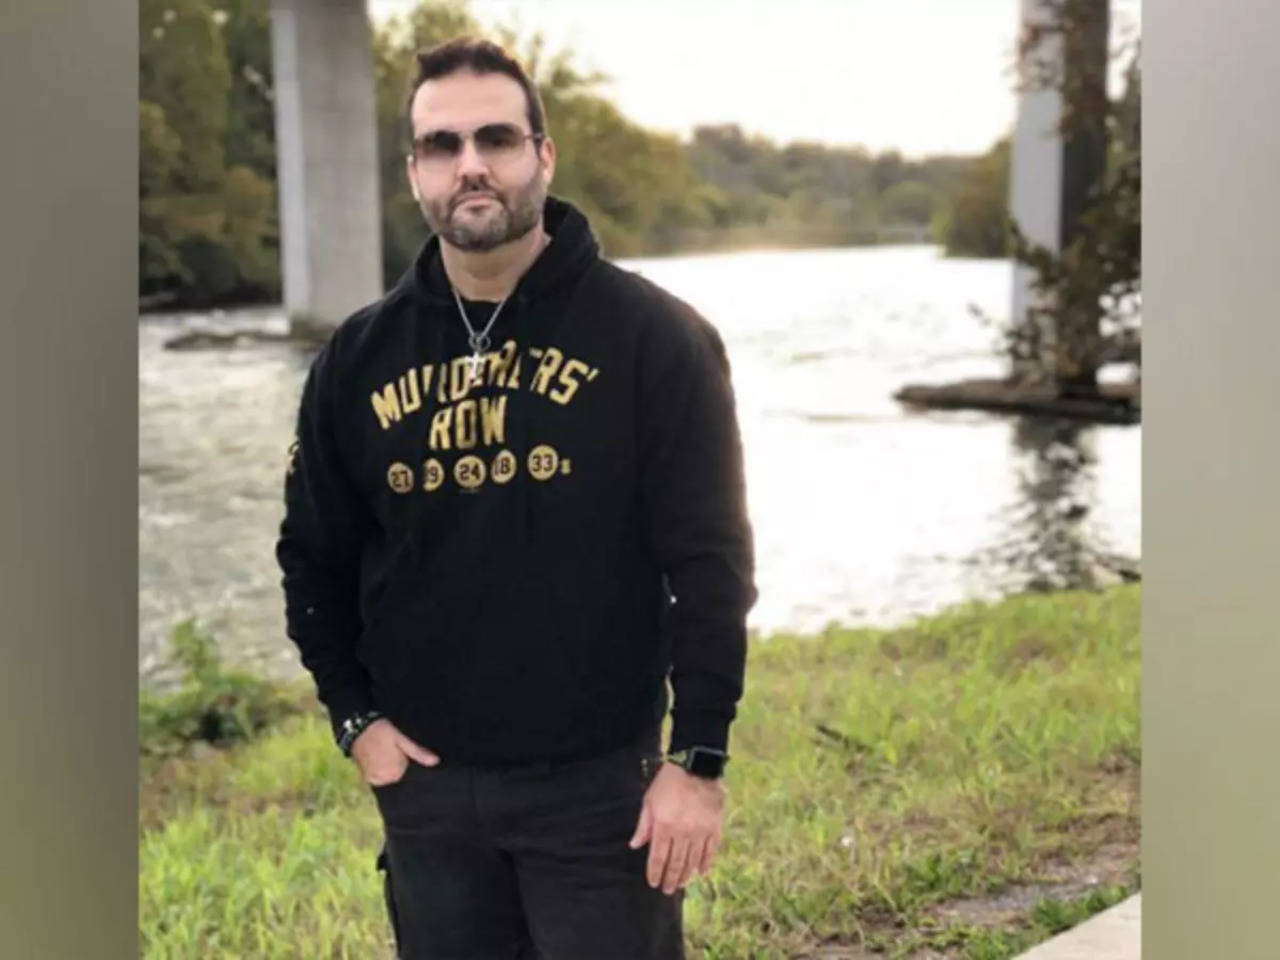 Why was Austin St. John arrested? Power Rangers star named in